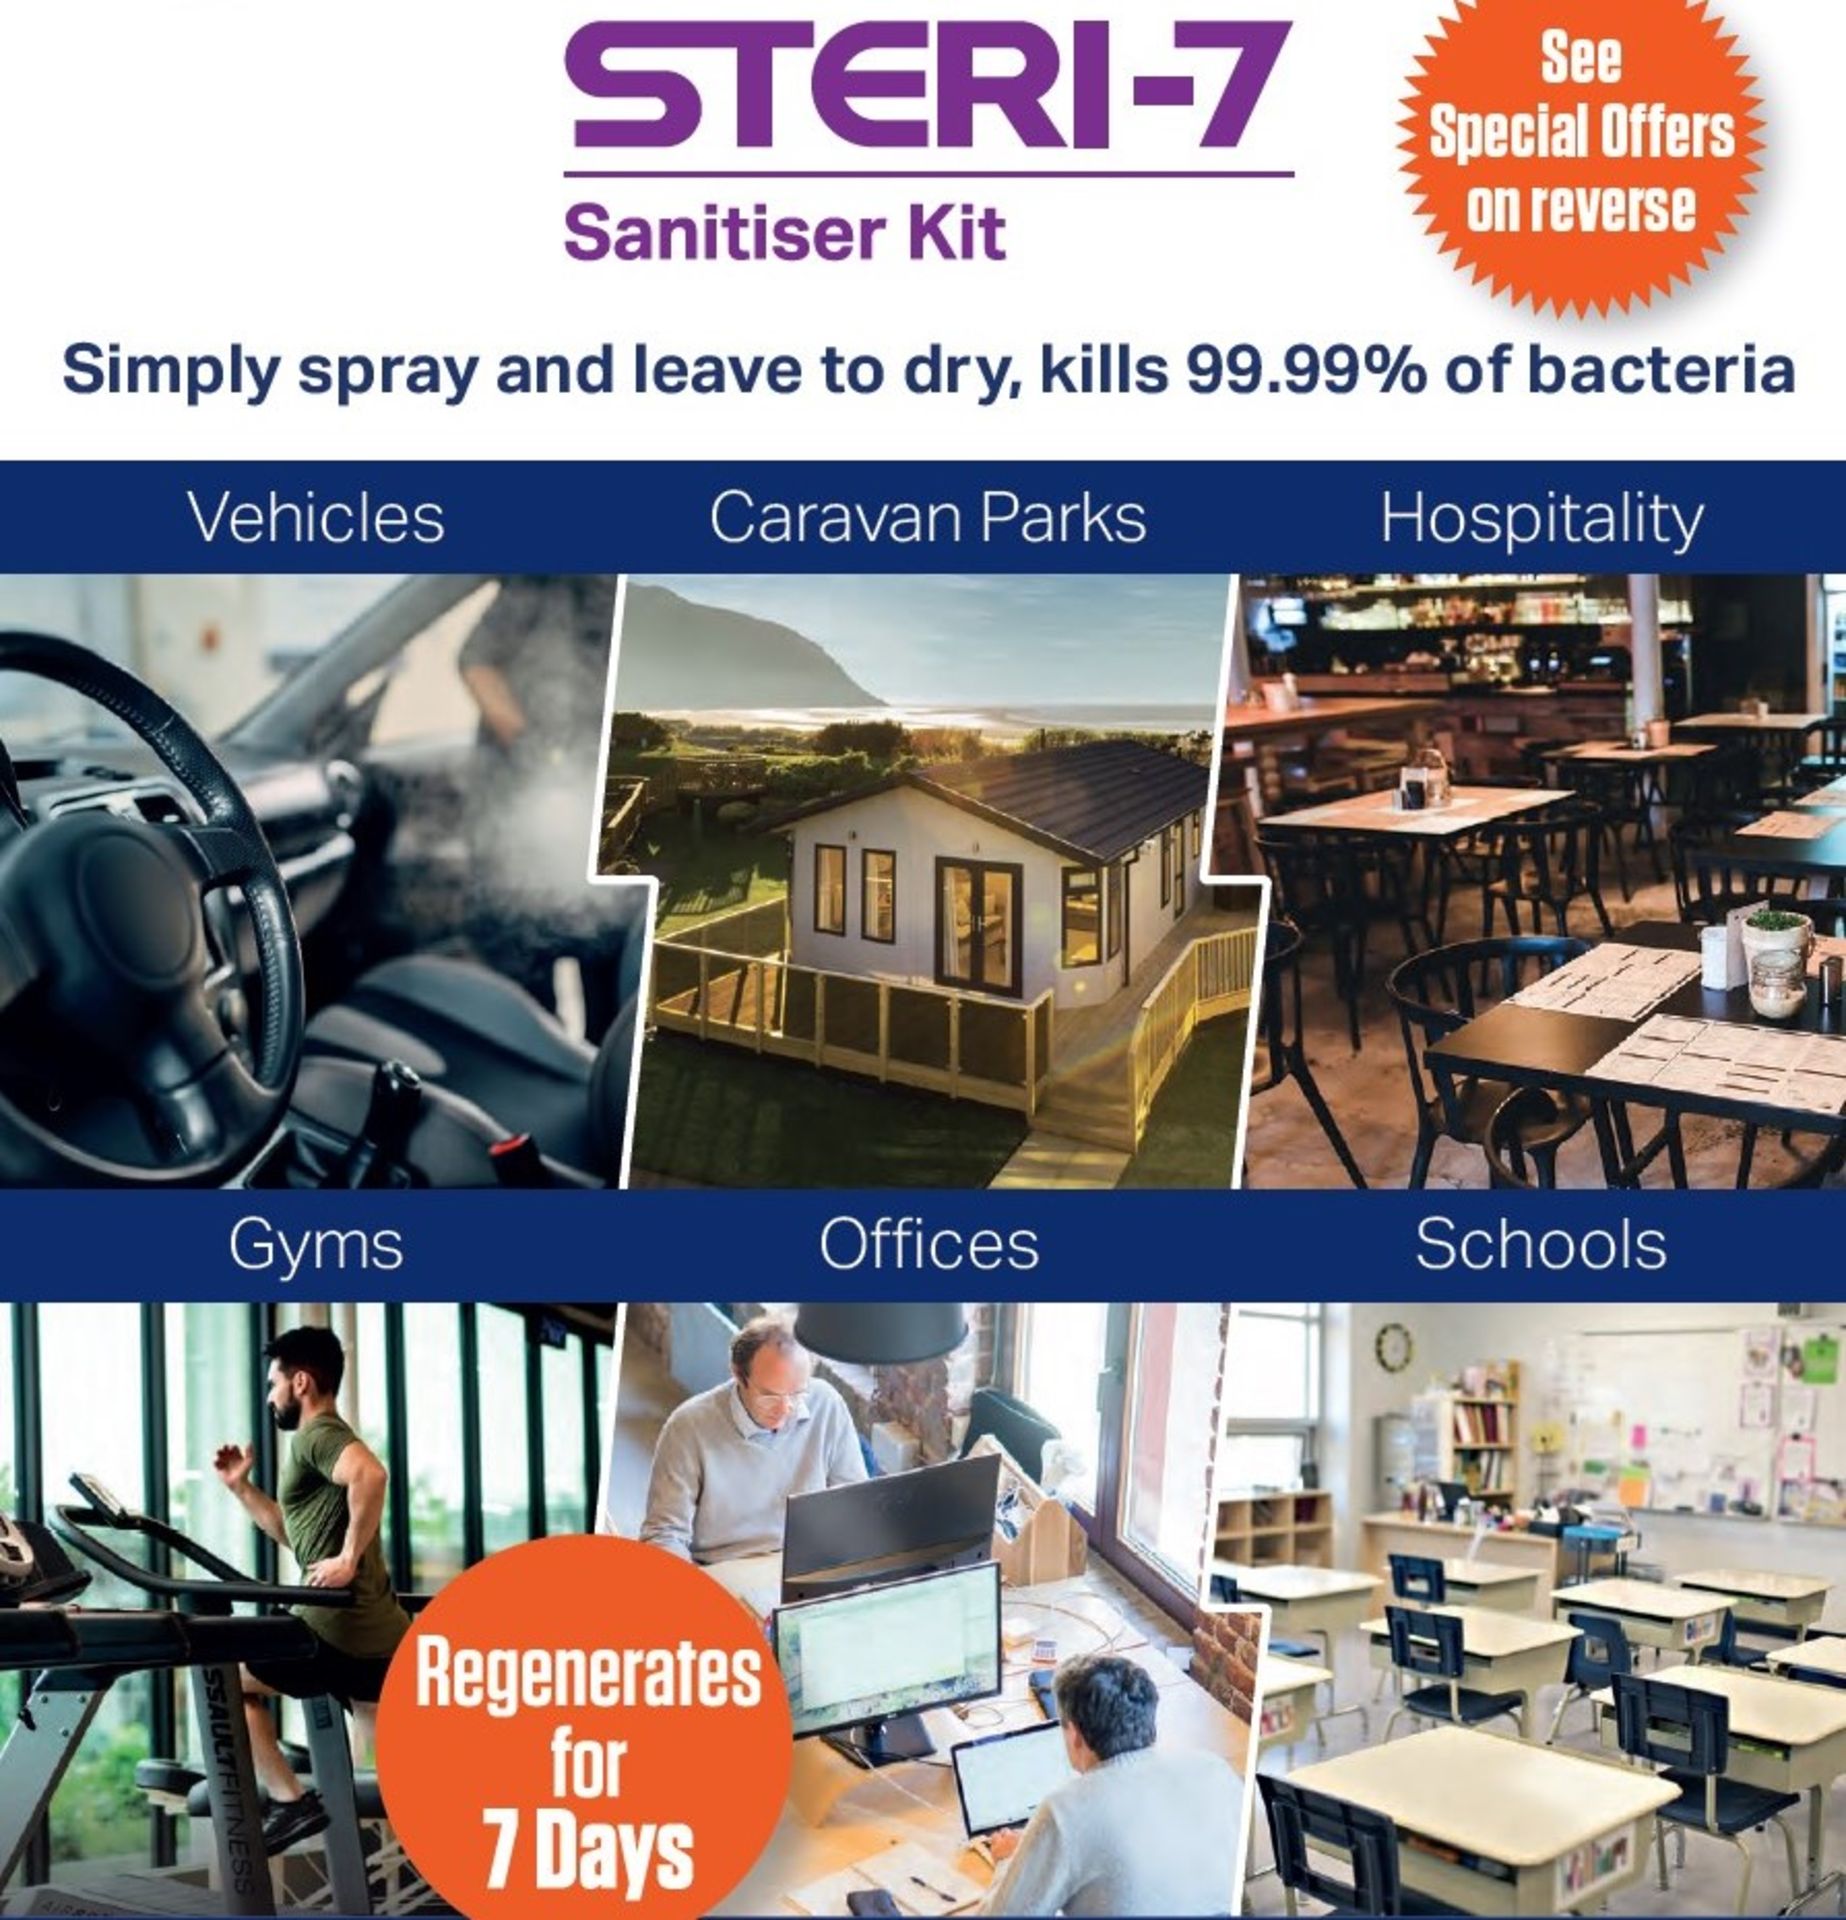 40 x Steri-7 5L Bottles of Xtra High Level Surface Disinfectant Cleaner - Ready to Use (10 outer - Image 6 of 12